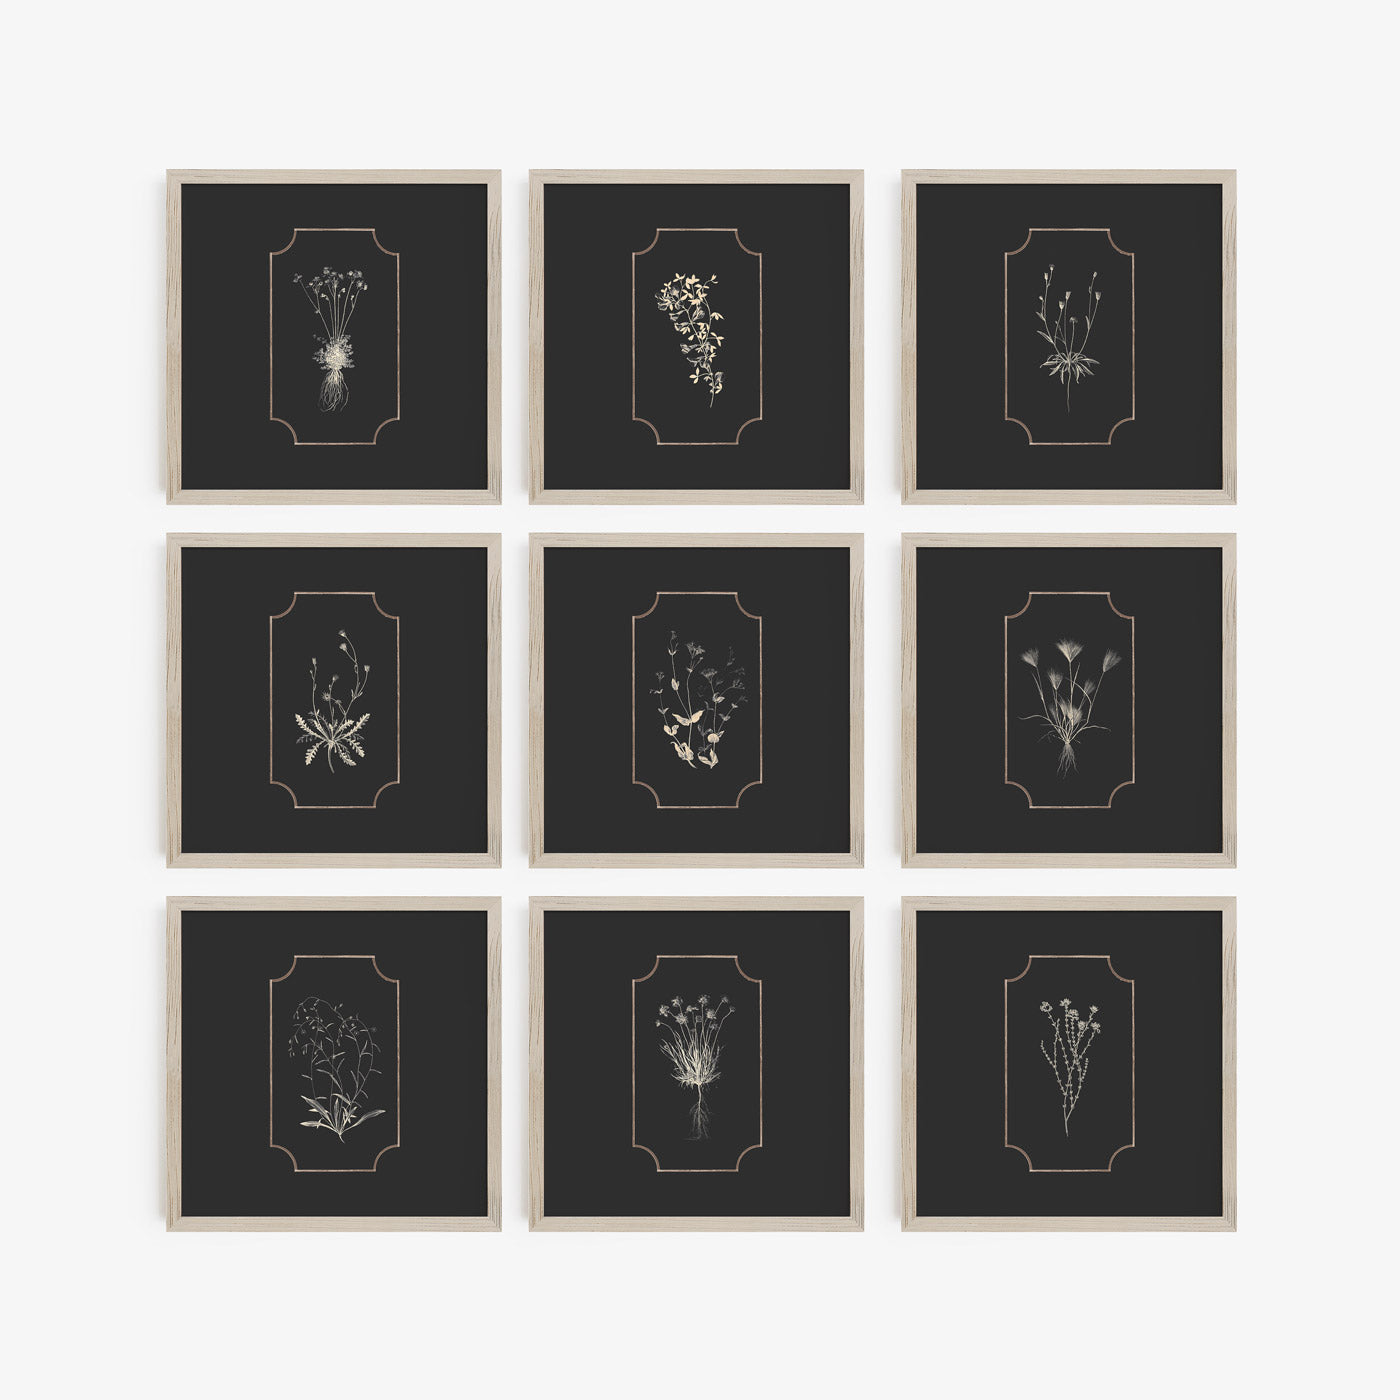 9 Stunning Botanical Silhouettes - Digital Prints for Home Decor | Instant Download